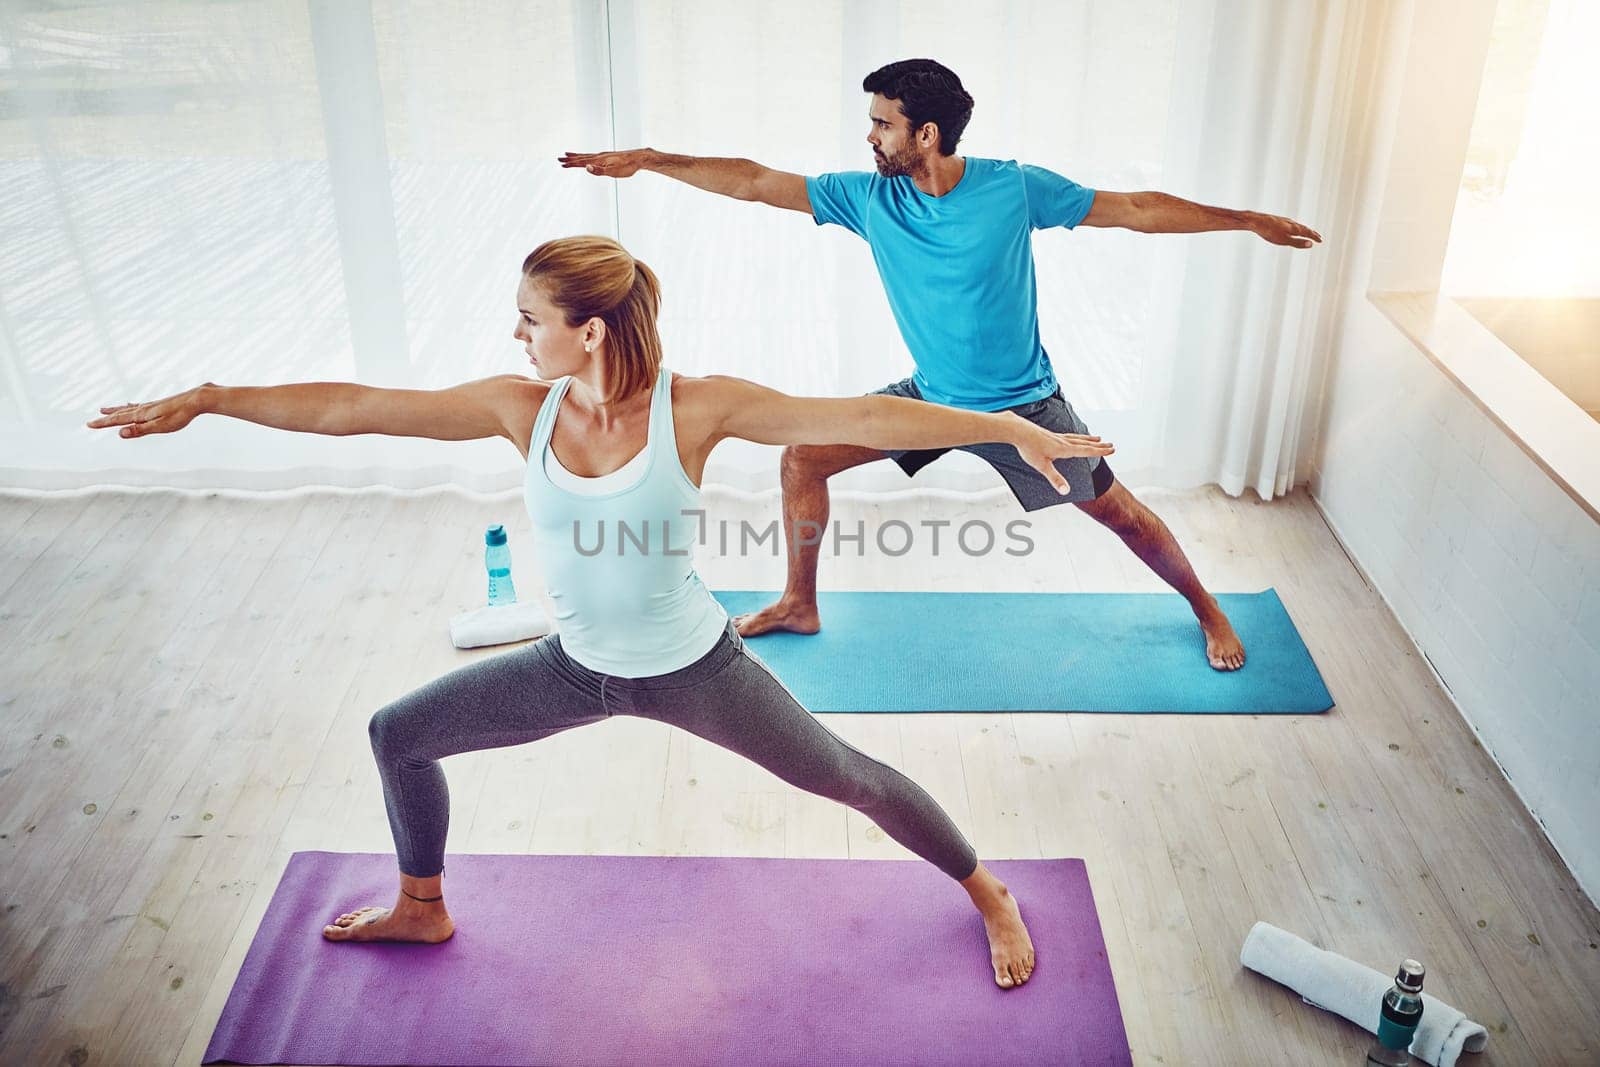 Yoga brings people together through movement. a couple practising yoga at home